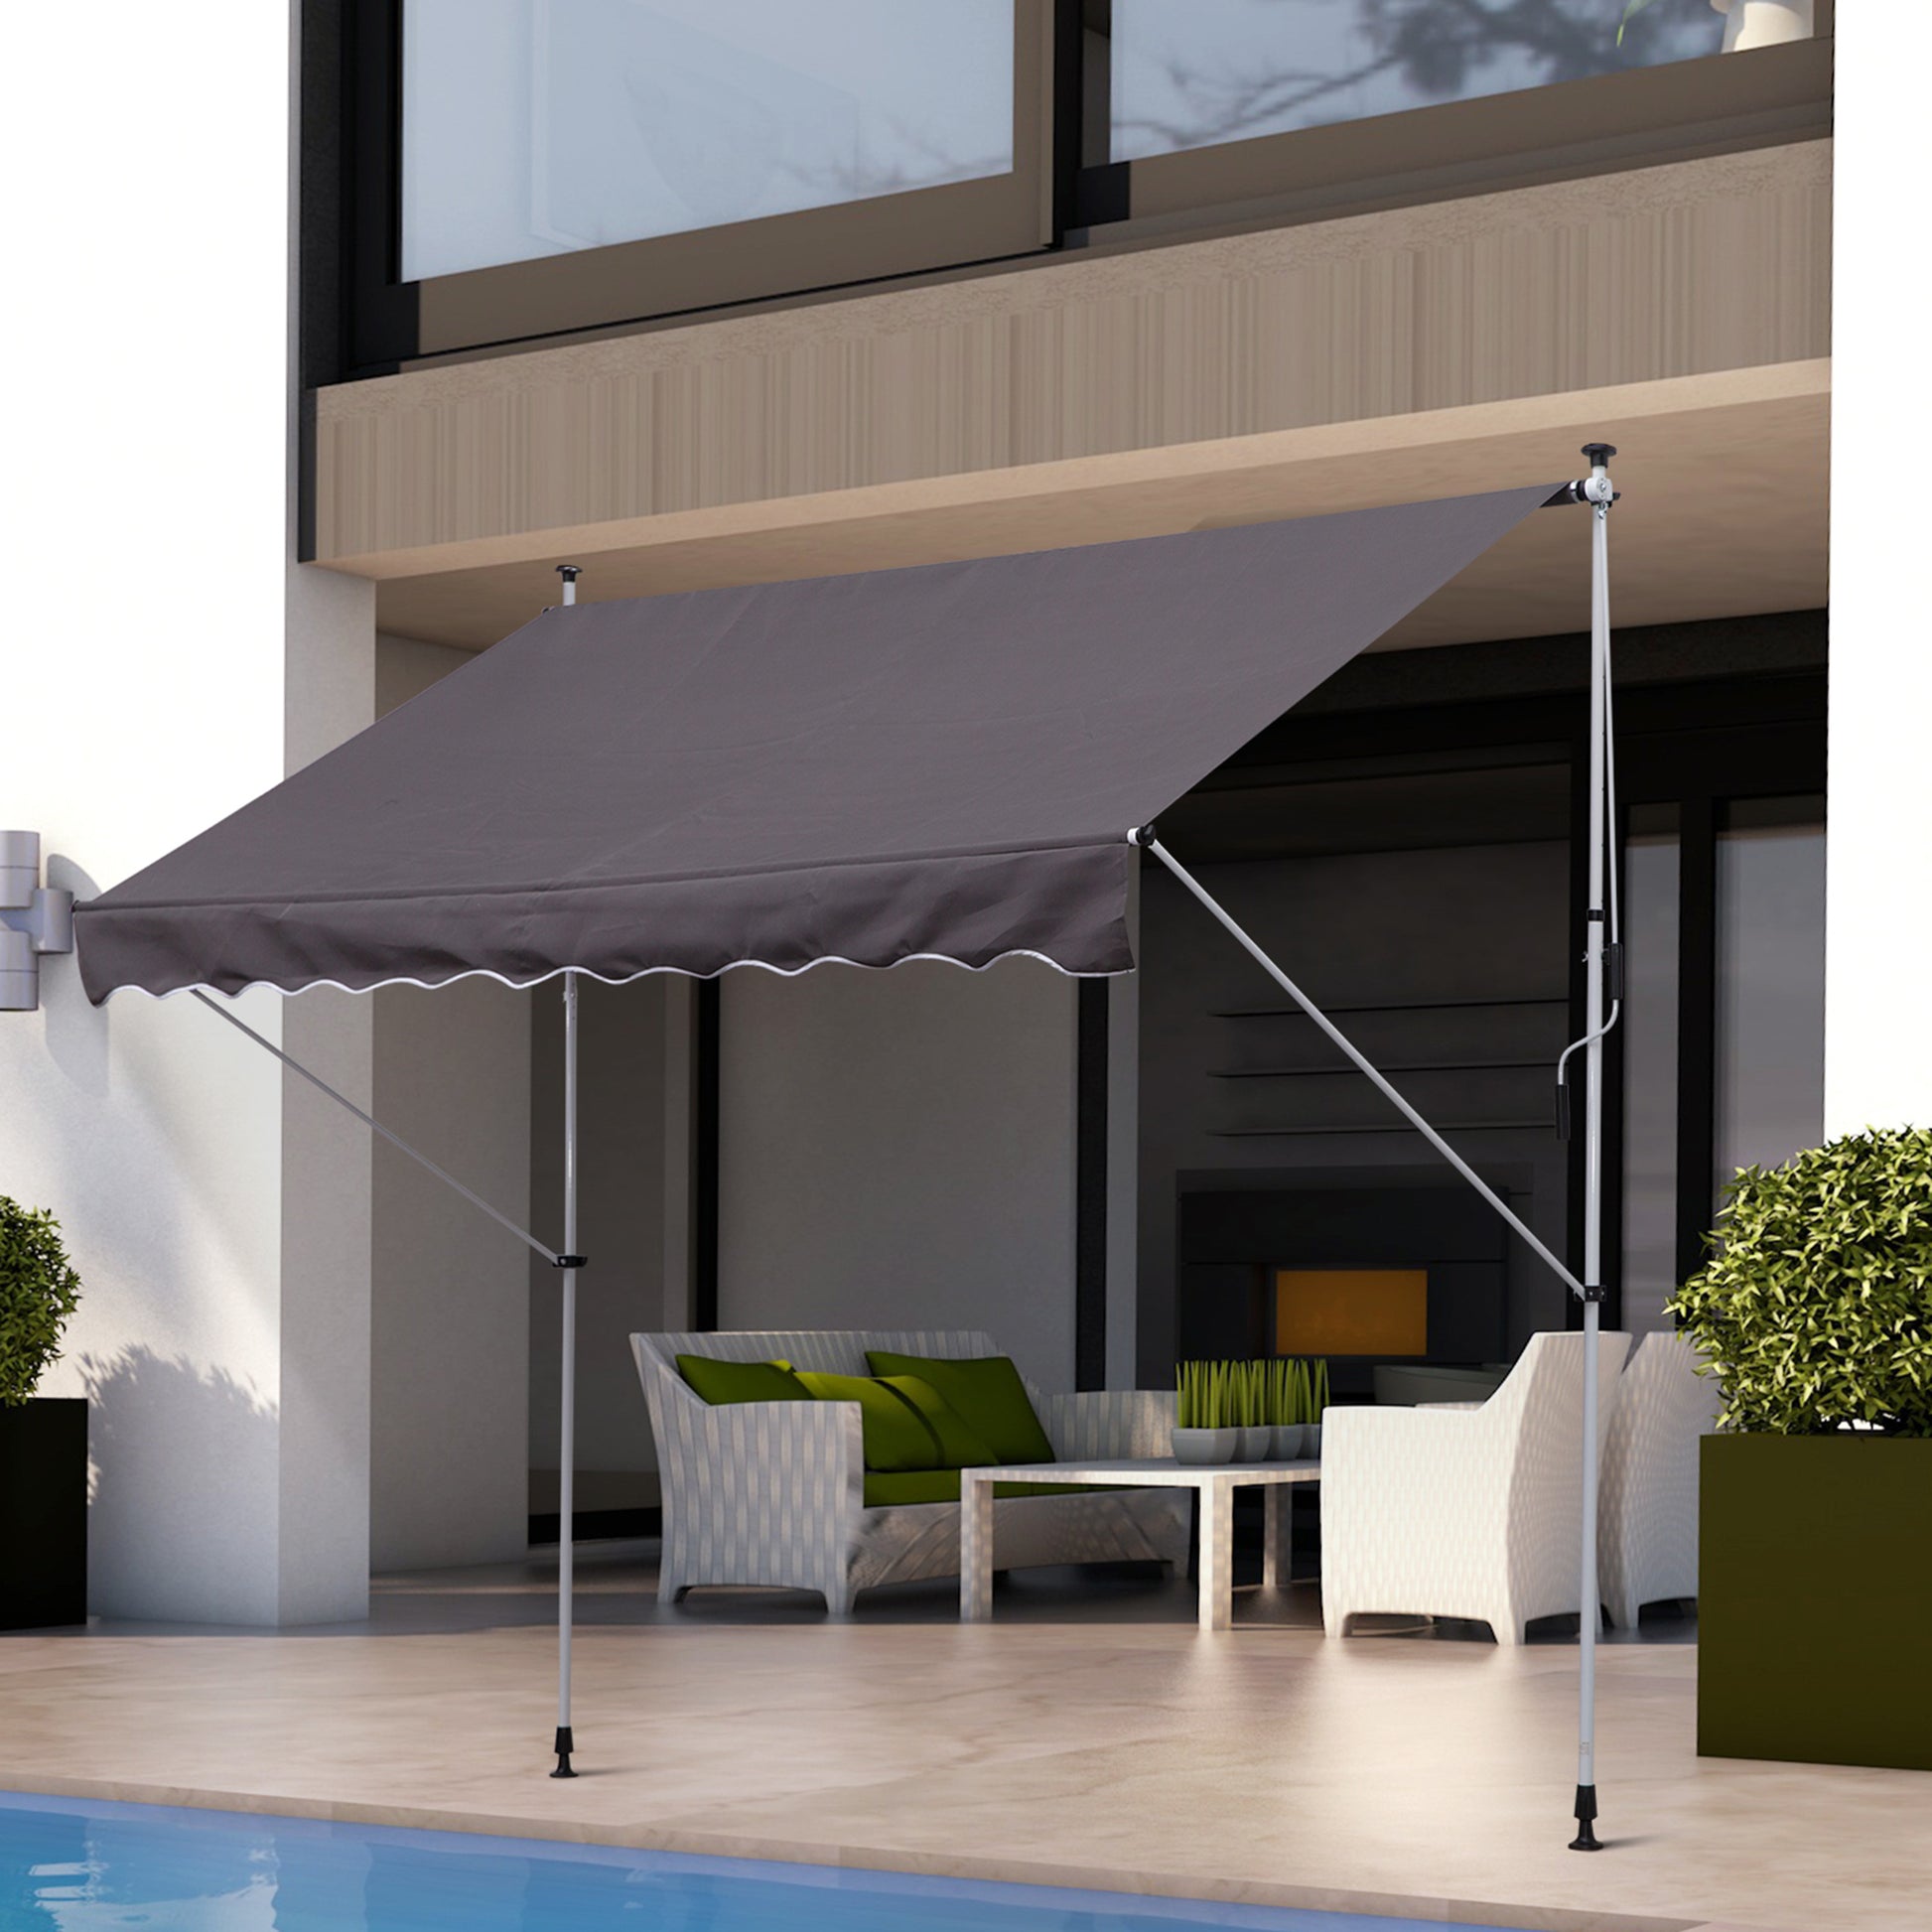 Outsunny Balcony 3 x 1.5m Manual Adjustable Awning DIY Patio Clamp Awning Canopy  Retractable Shade Shelter - Grey - OutdoorBox